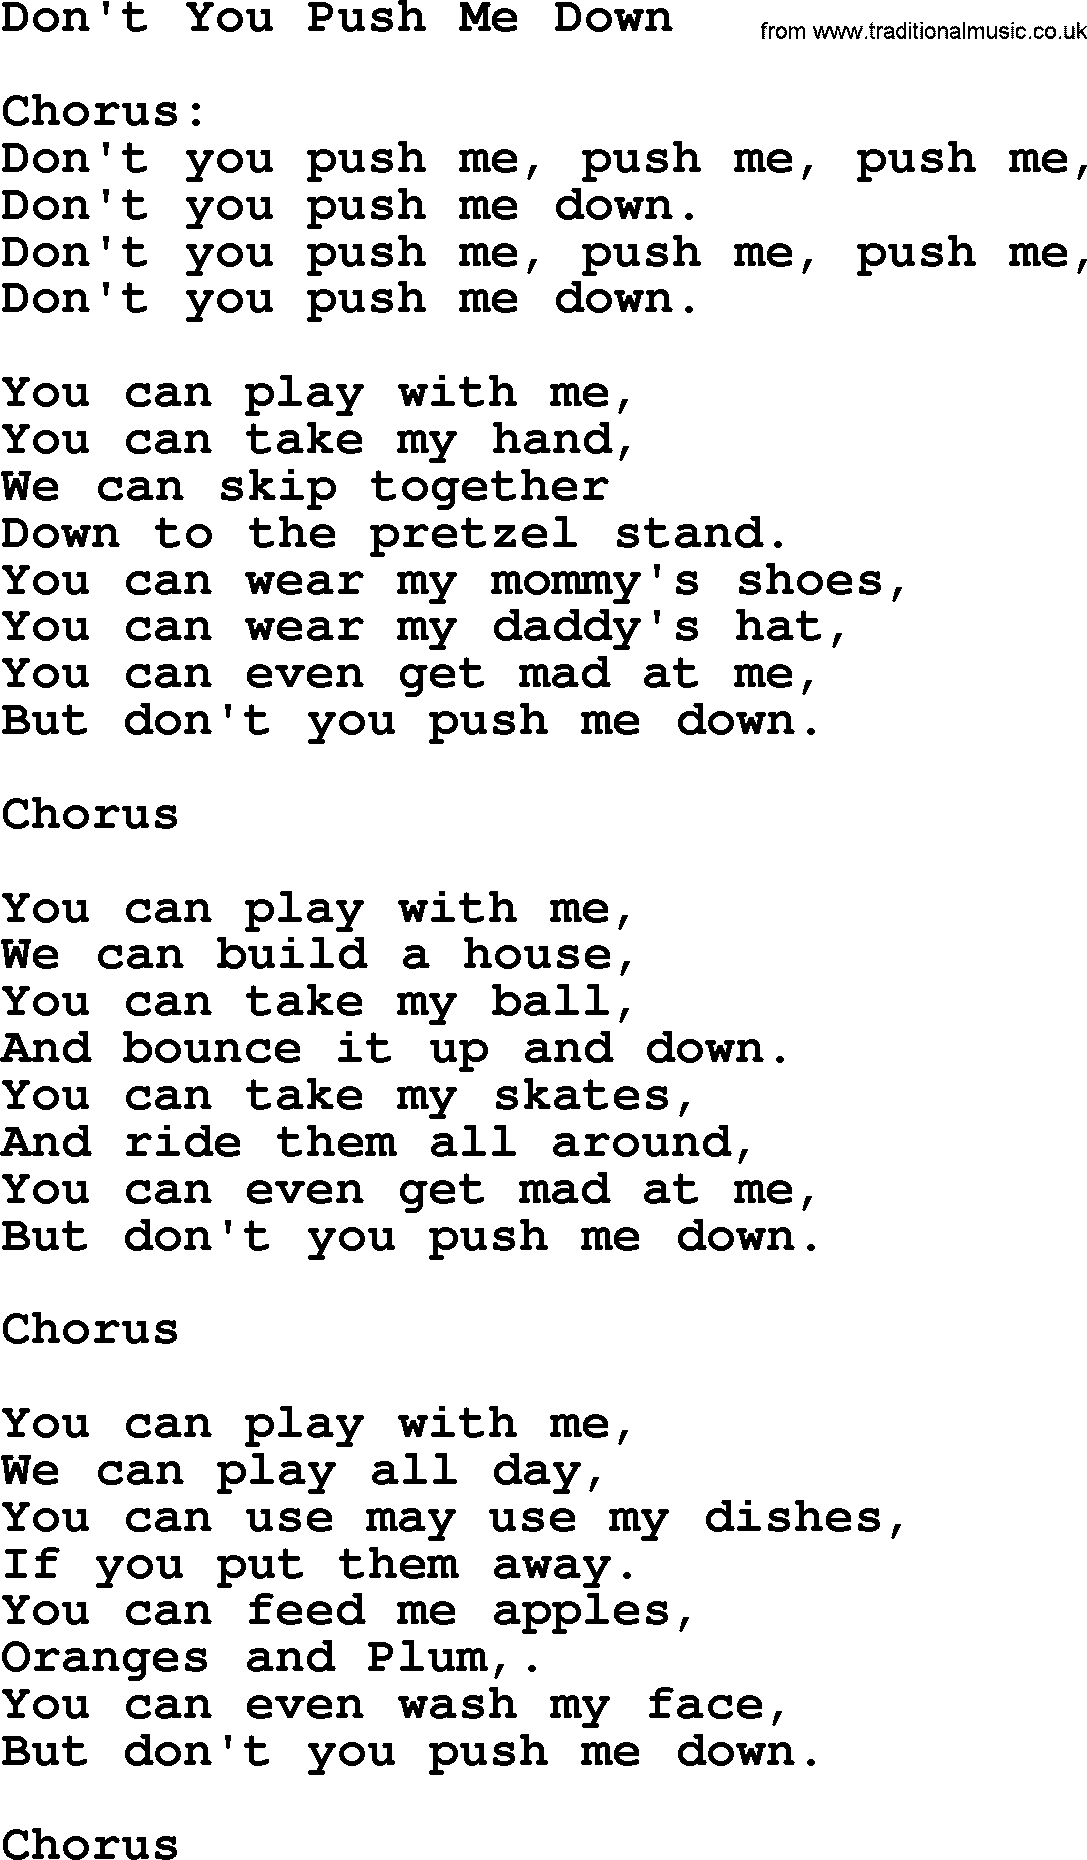 Woody Guthrie song Dont You Push Me Down lyrics